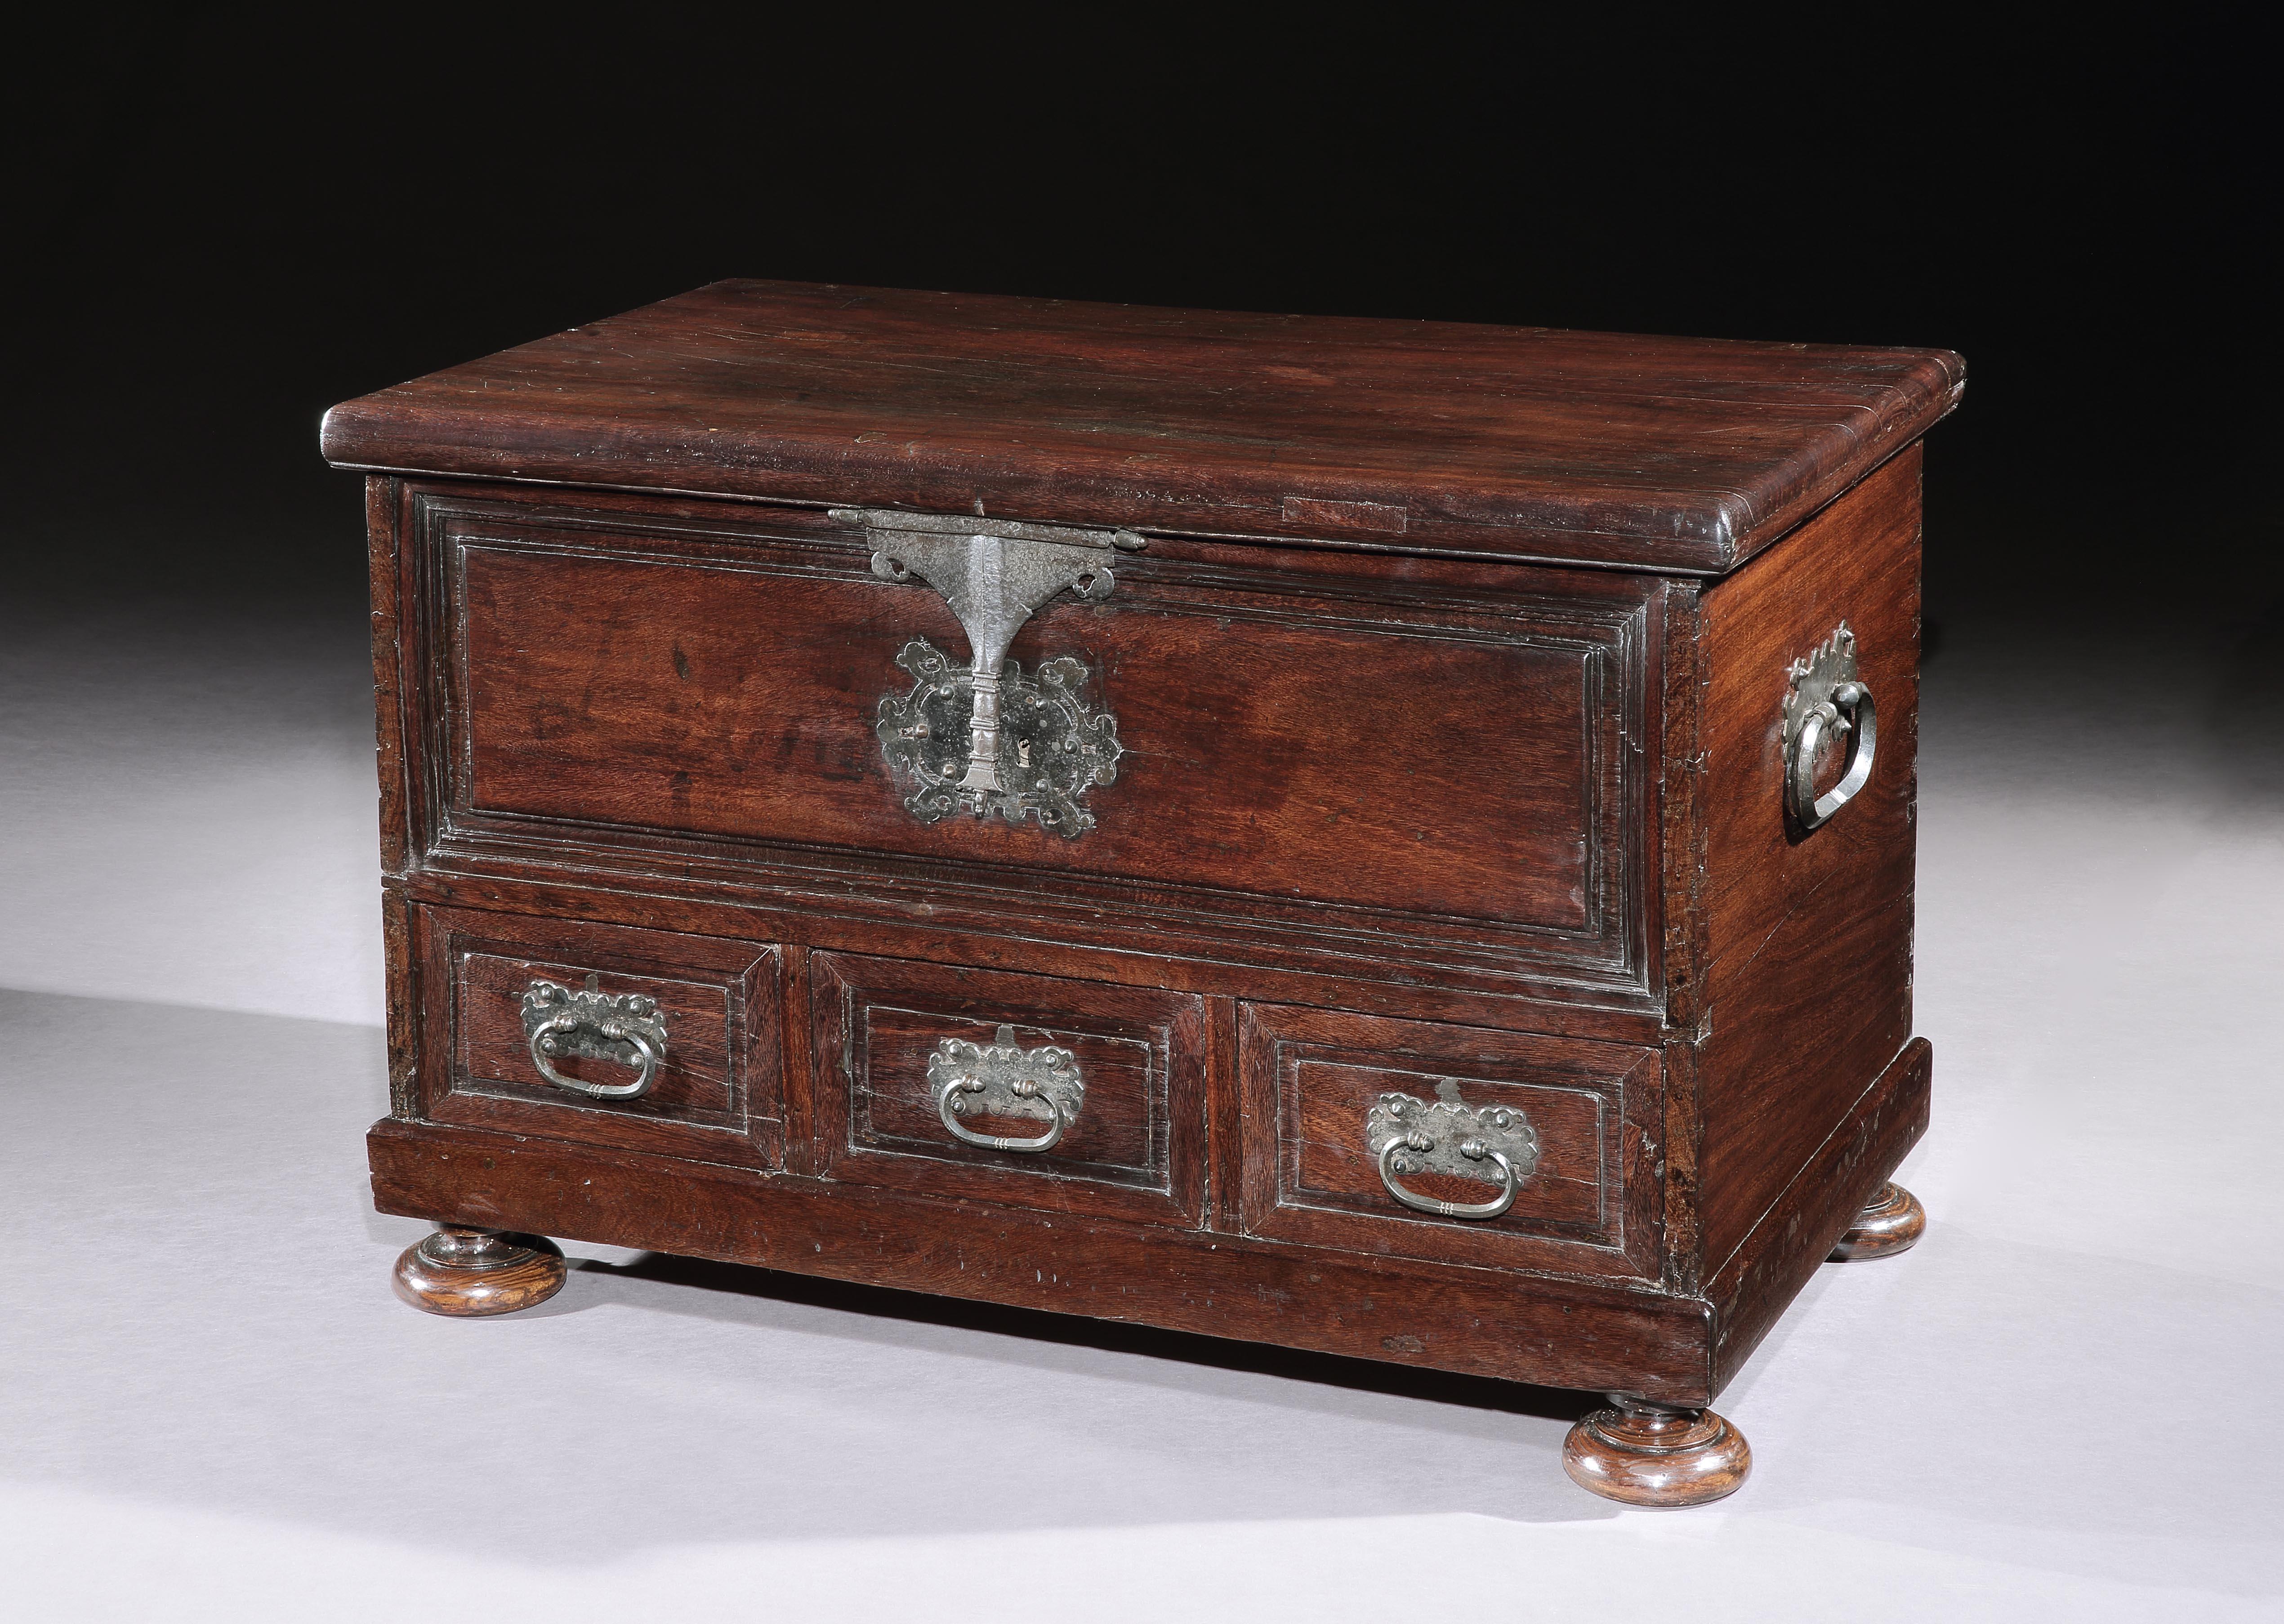 This striking chest is made from a Brazilian hardwood which I have not been able to identify. The color and figuring of the timber together with the Classic form and ornamentation supplemented by the elaborate ironwork create a simple, bold